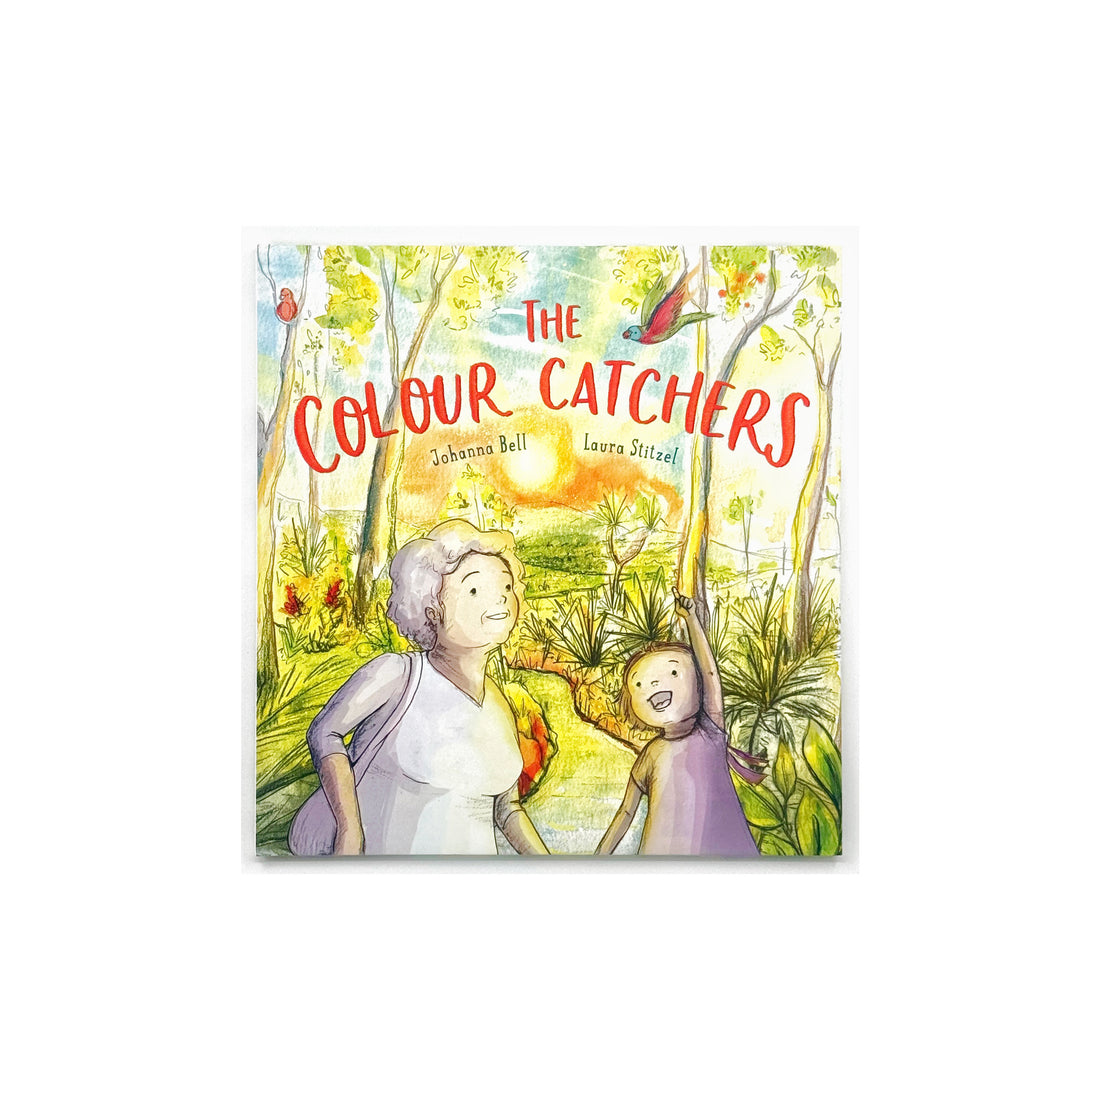 The Colour Catchers by Johanna Bell